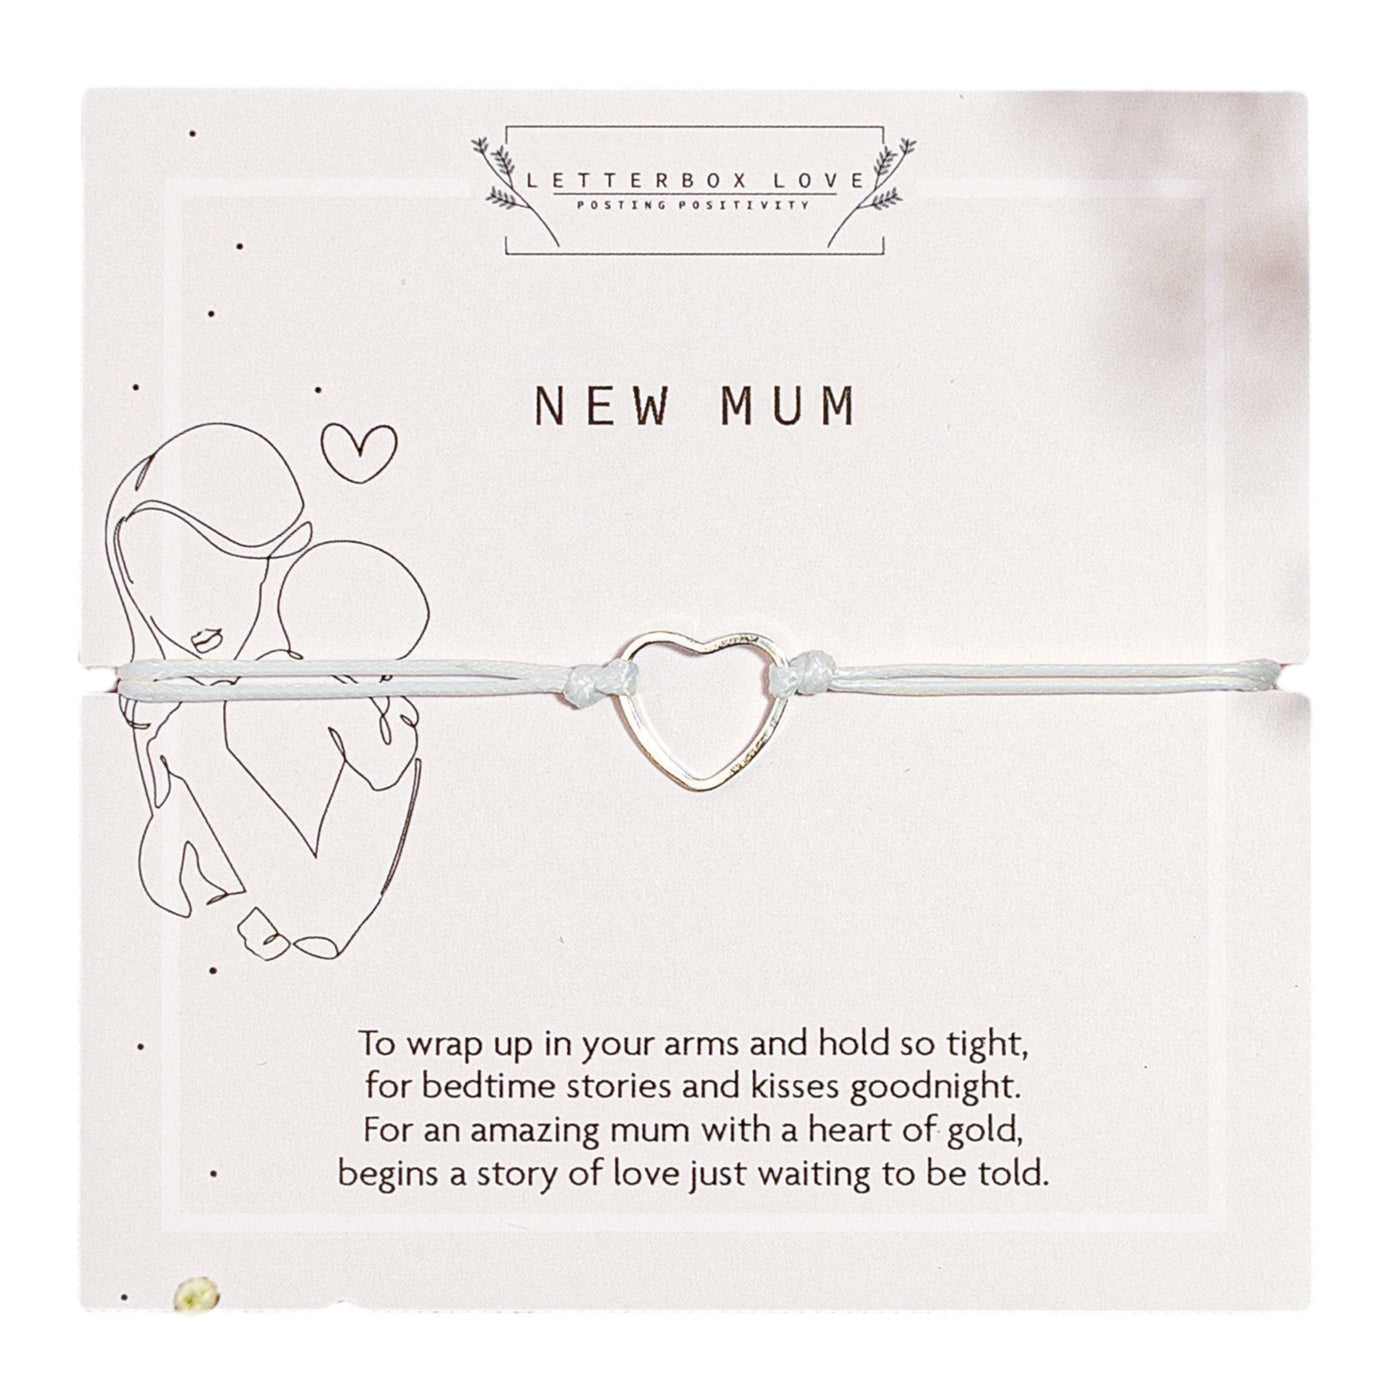 An elegant 'New Mum' bracelet with an open heart charm presented on a white card featuring a line-drawn image of a mother embracing her child and a poetic message celebrating new motherhood.